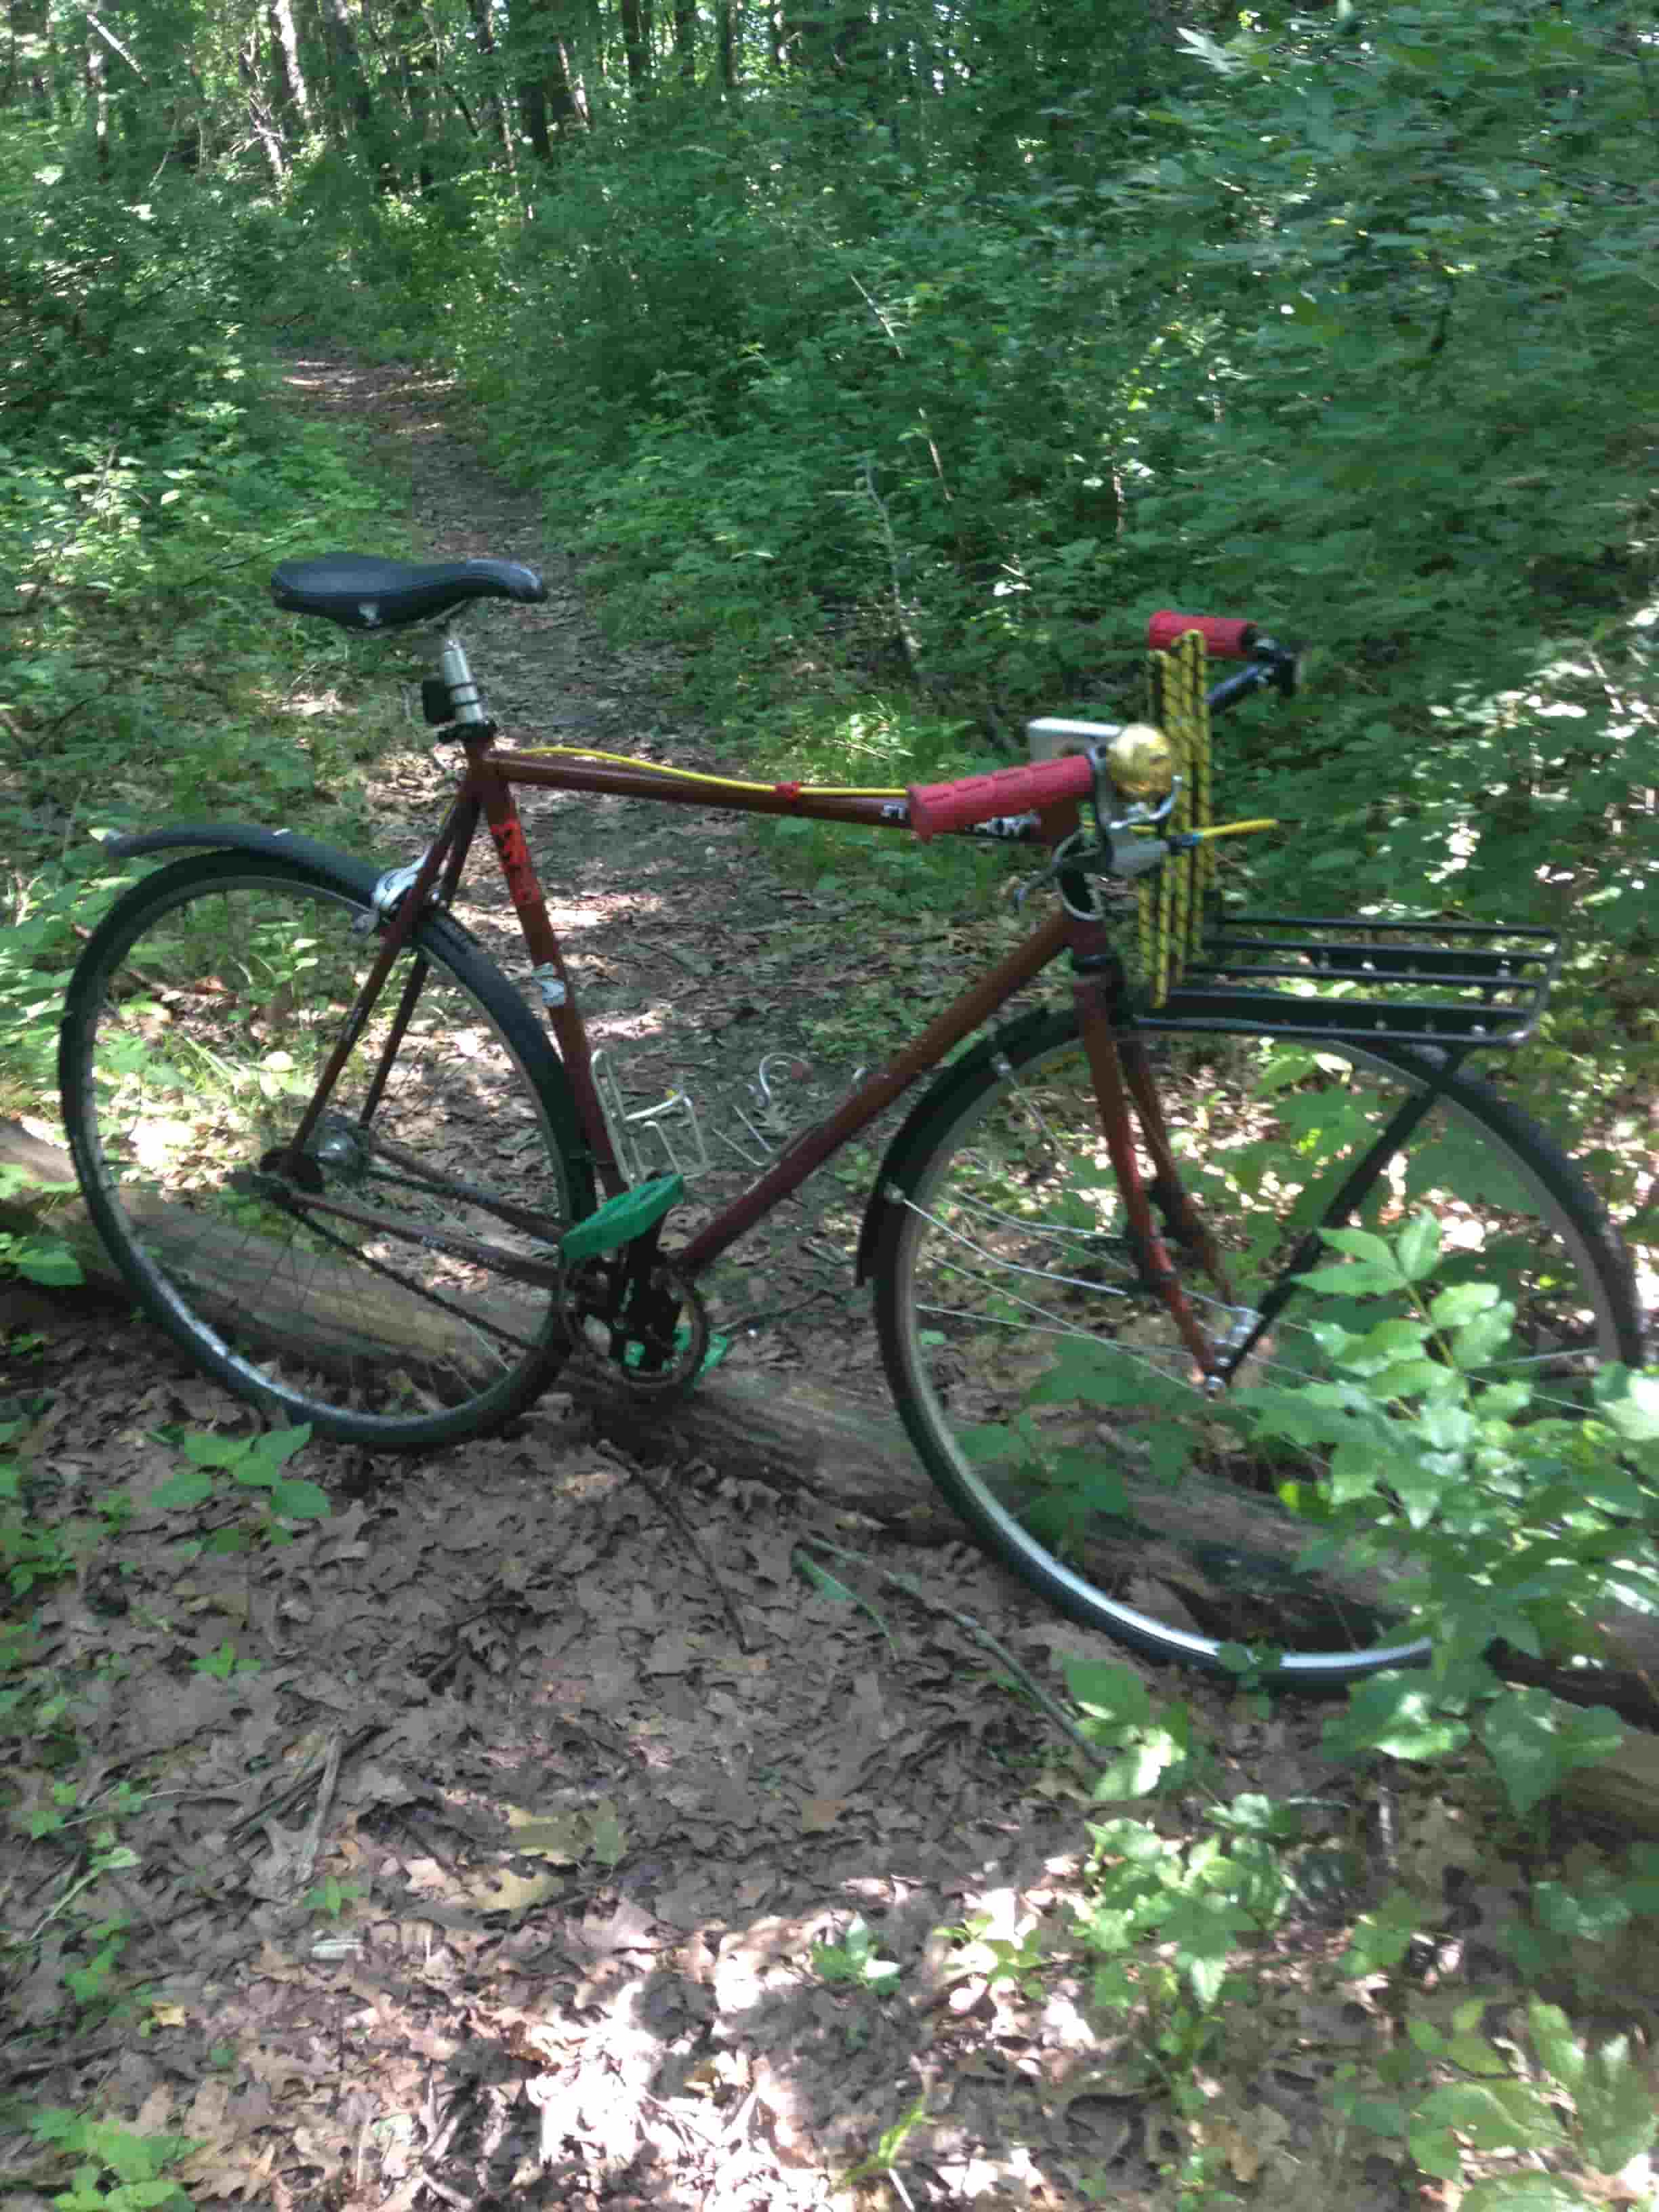 Right side view of red Surly Steamroller bike, parked across a dirt trail in the green woods